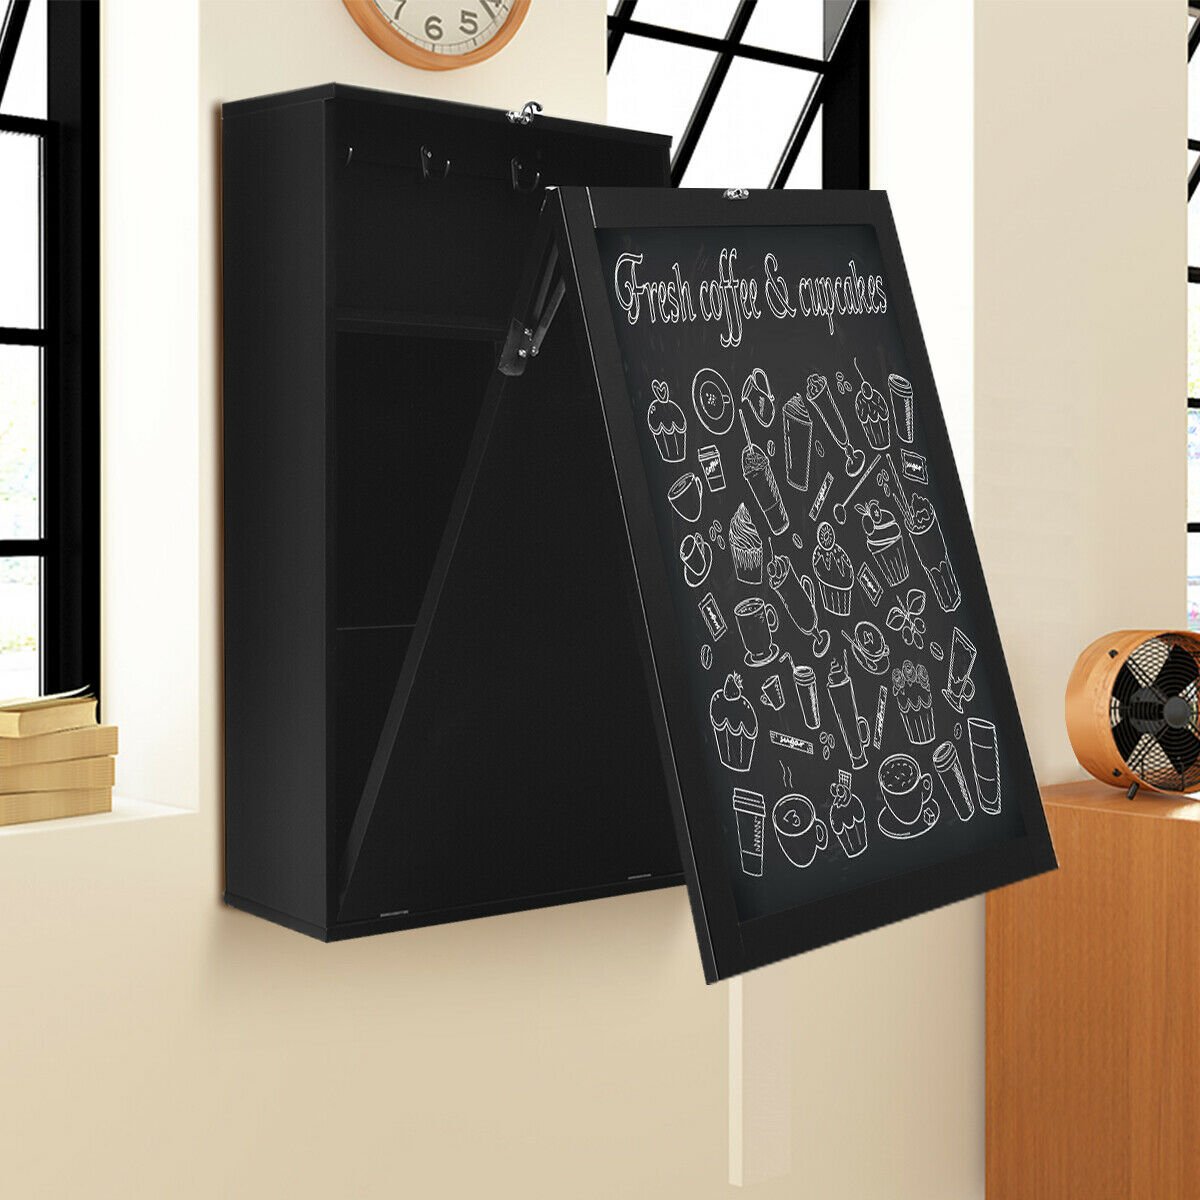 Convertible Wall Mounted Table with A Chalkboard, Black - Gallery Canada